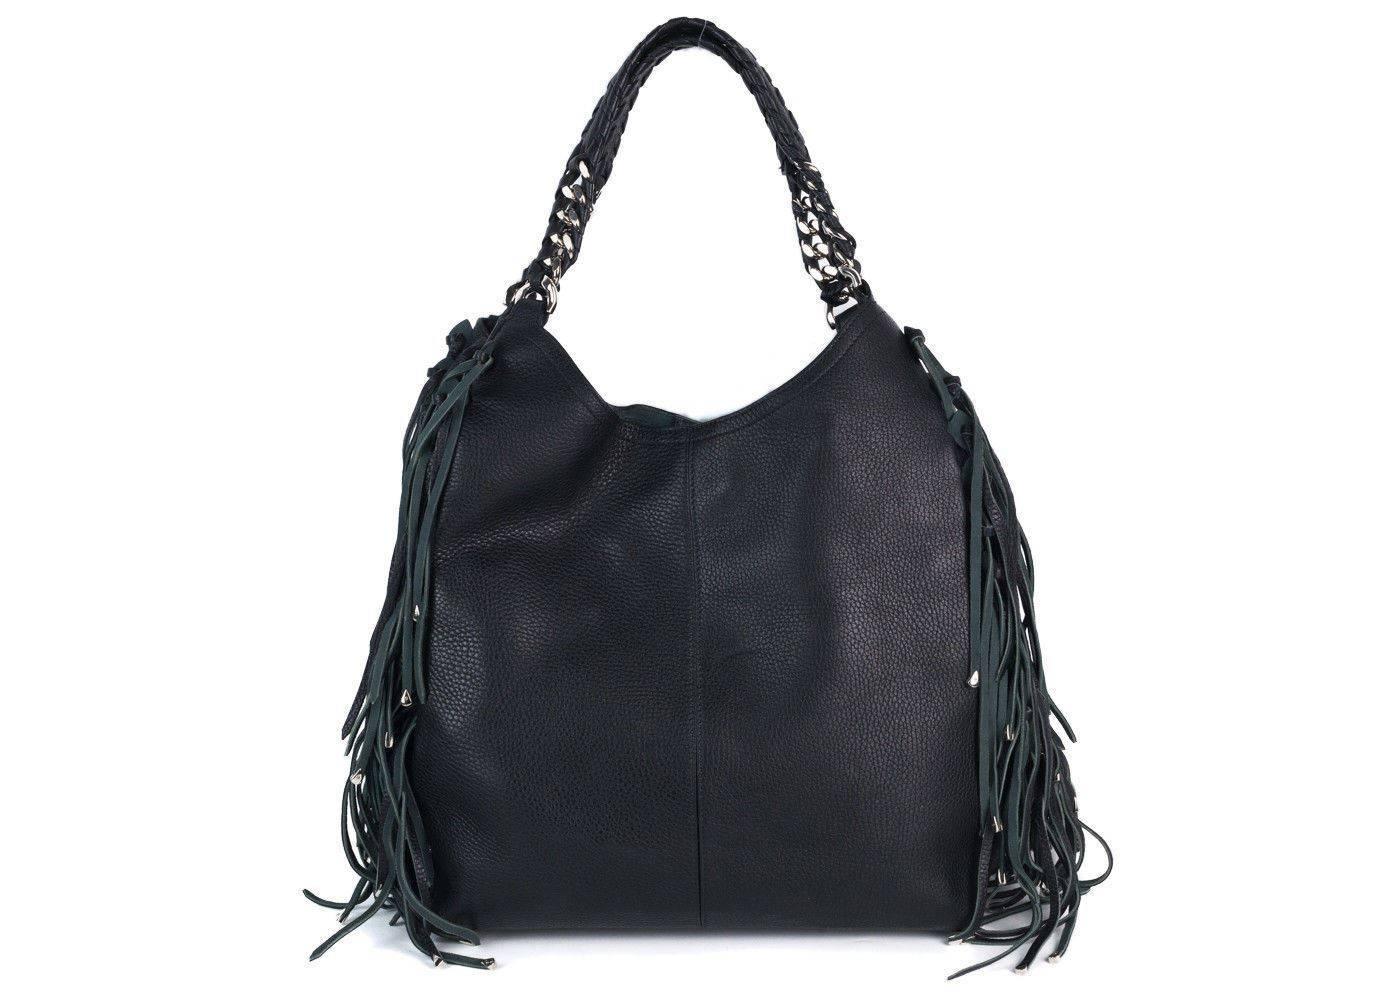 Brand New Roberto Cavalli Suede Fringe Edge Handbag
Original Tag & Sleeper Bag
Retails in Stores & Online for $2550
Size 13 H x 3 D x 15 L

Take your Roberto Cavalli Back with you for that updated street style look. This pure leather bag features